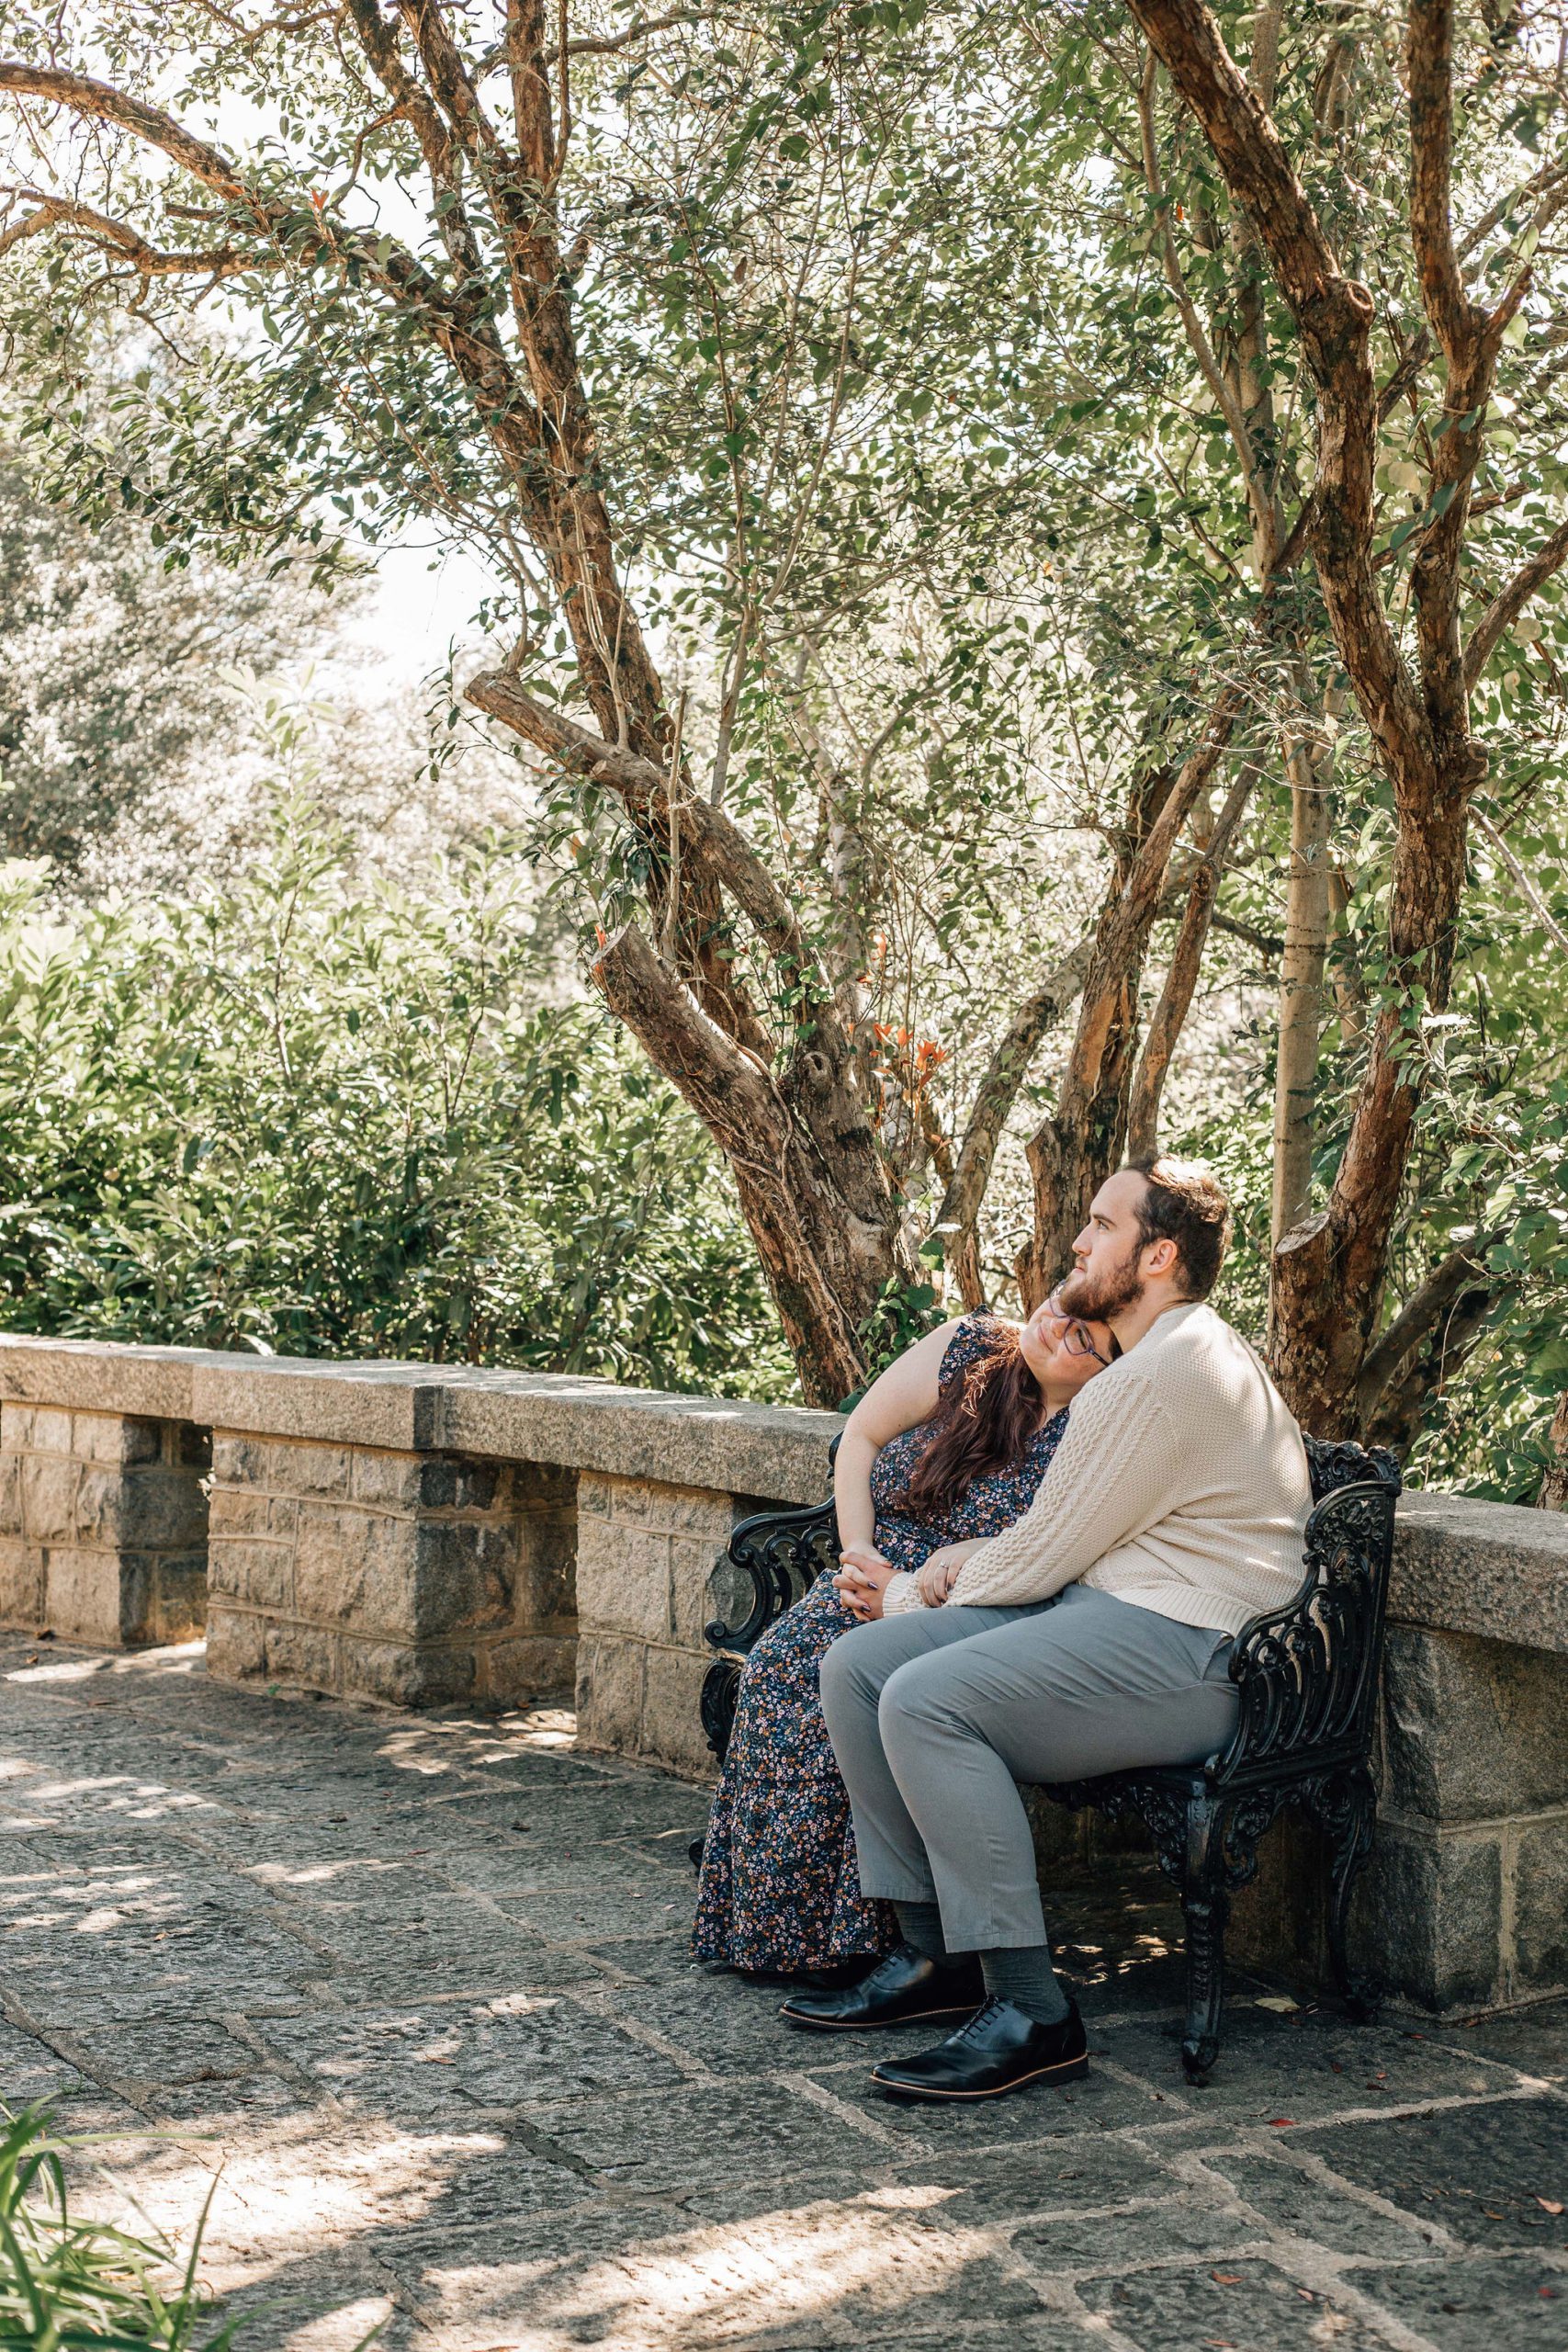 natural engagement photo pose ideas of Couple sitting together on a bench having a quiet moment looking off together thinking about their Maymont Wedding Venue plans